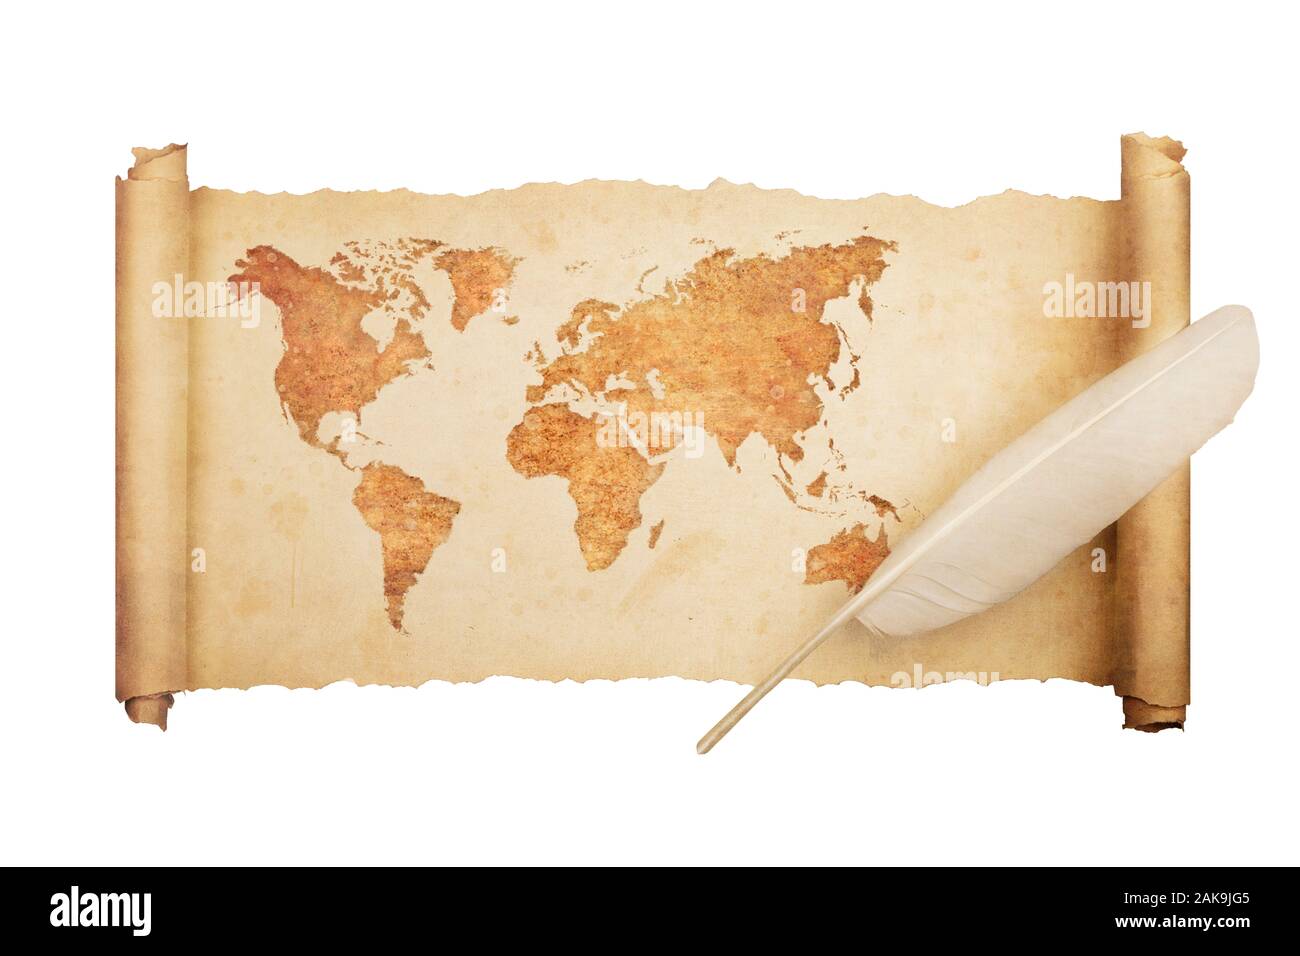 Ancient, old world map on  vintage scroll paper isolated on white background with feather. Stock Photo